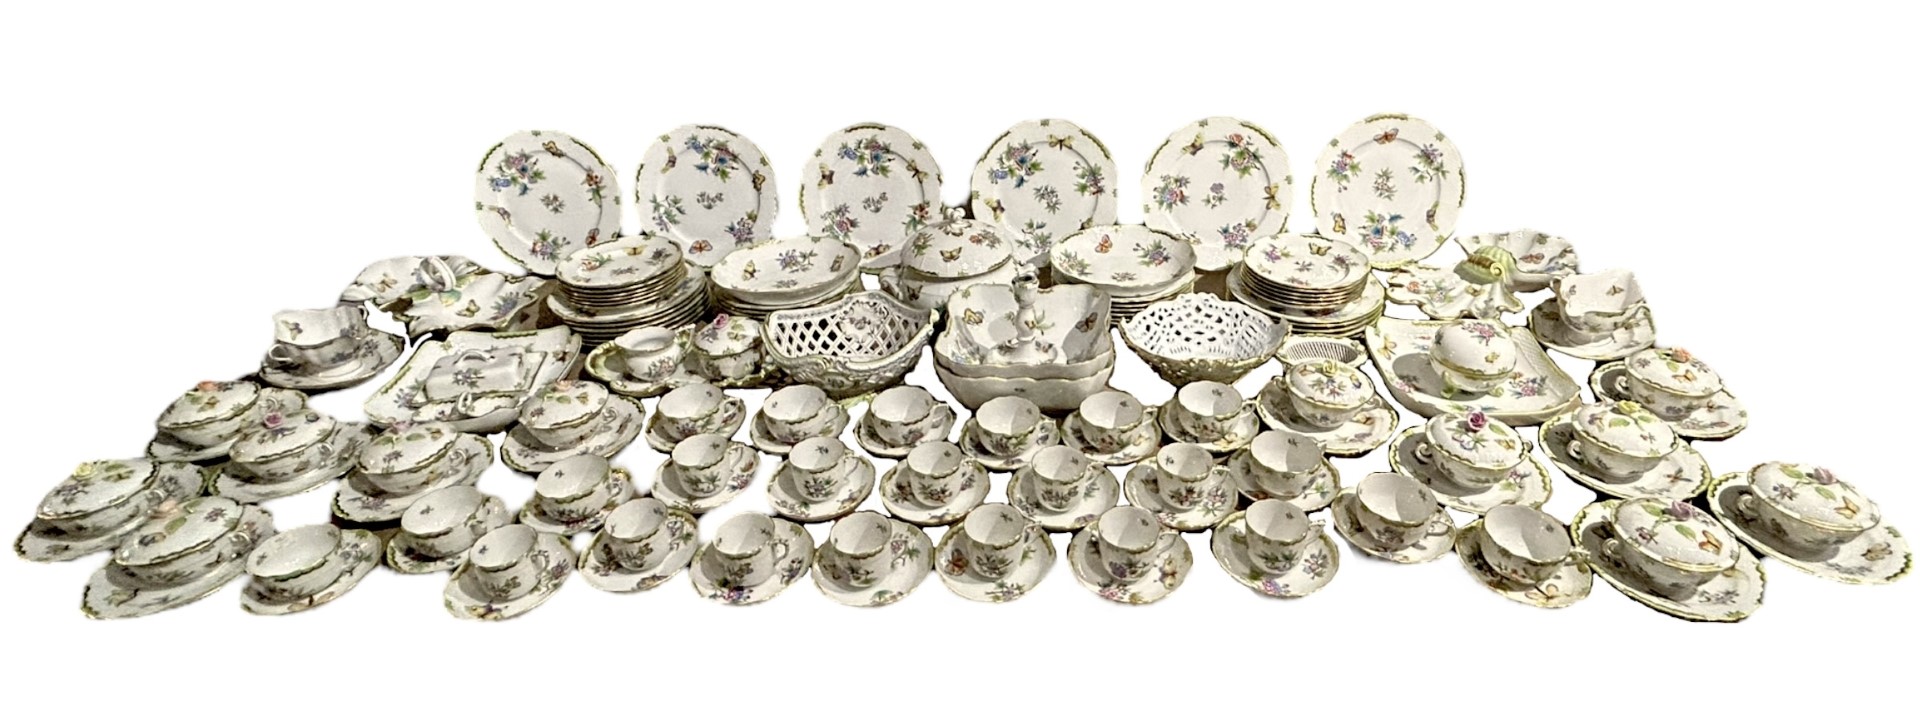 HEREND, HUNGARY, AN EXTENSIVE COLLECTION OF 20TH CENTURY ‘QUEEN VICTORIA’ PATTERN PORCELAIN PART